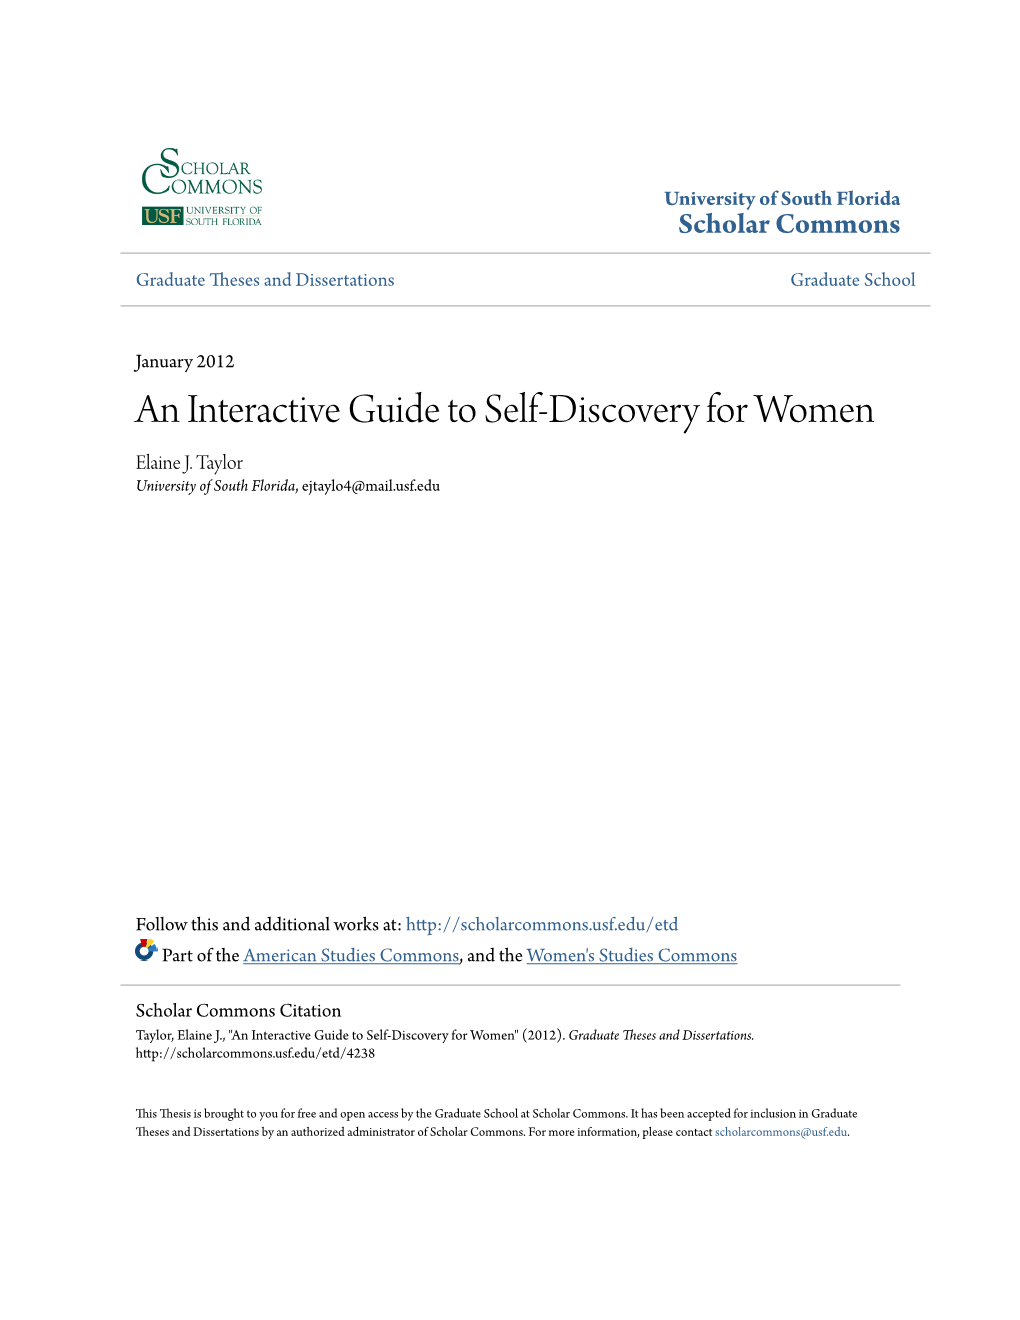 An Interactive Guide to Self-Discovery for Women Elaine J